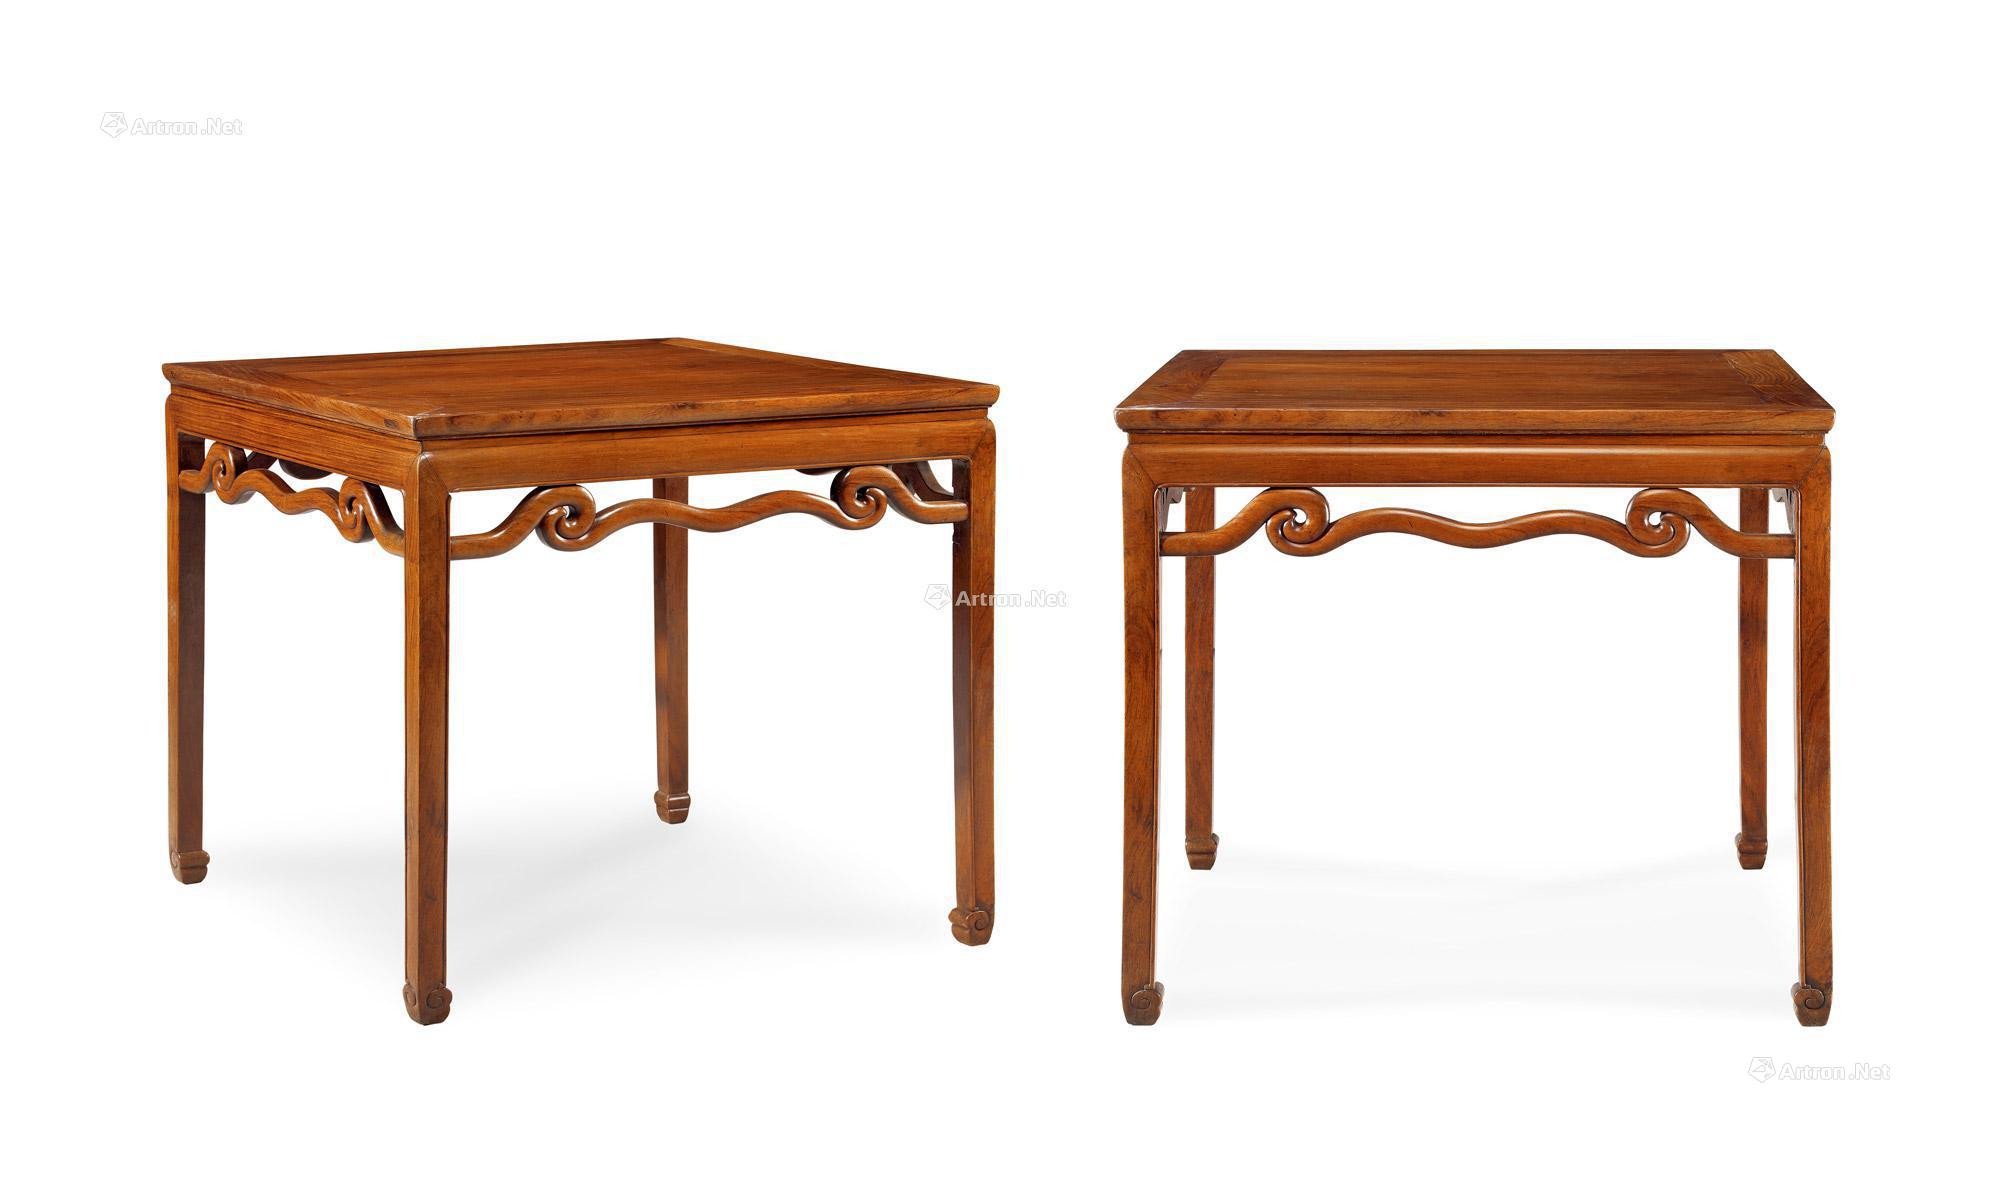 PAIR OF HUANGHUALI SQUARE-SHAPE TABLE